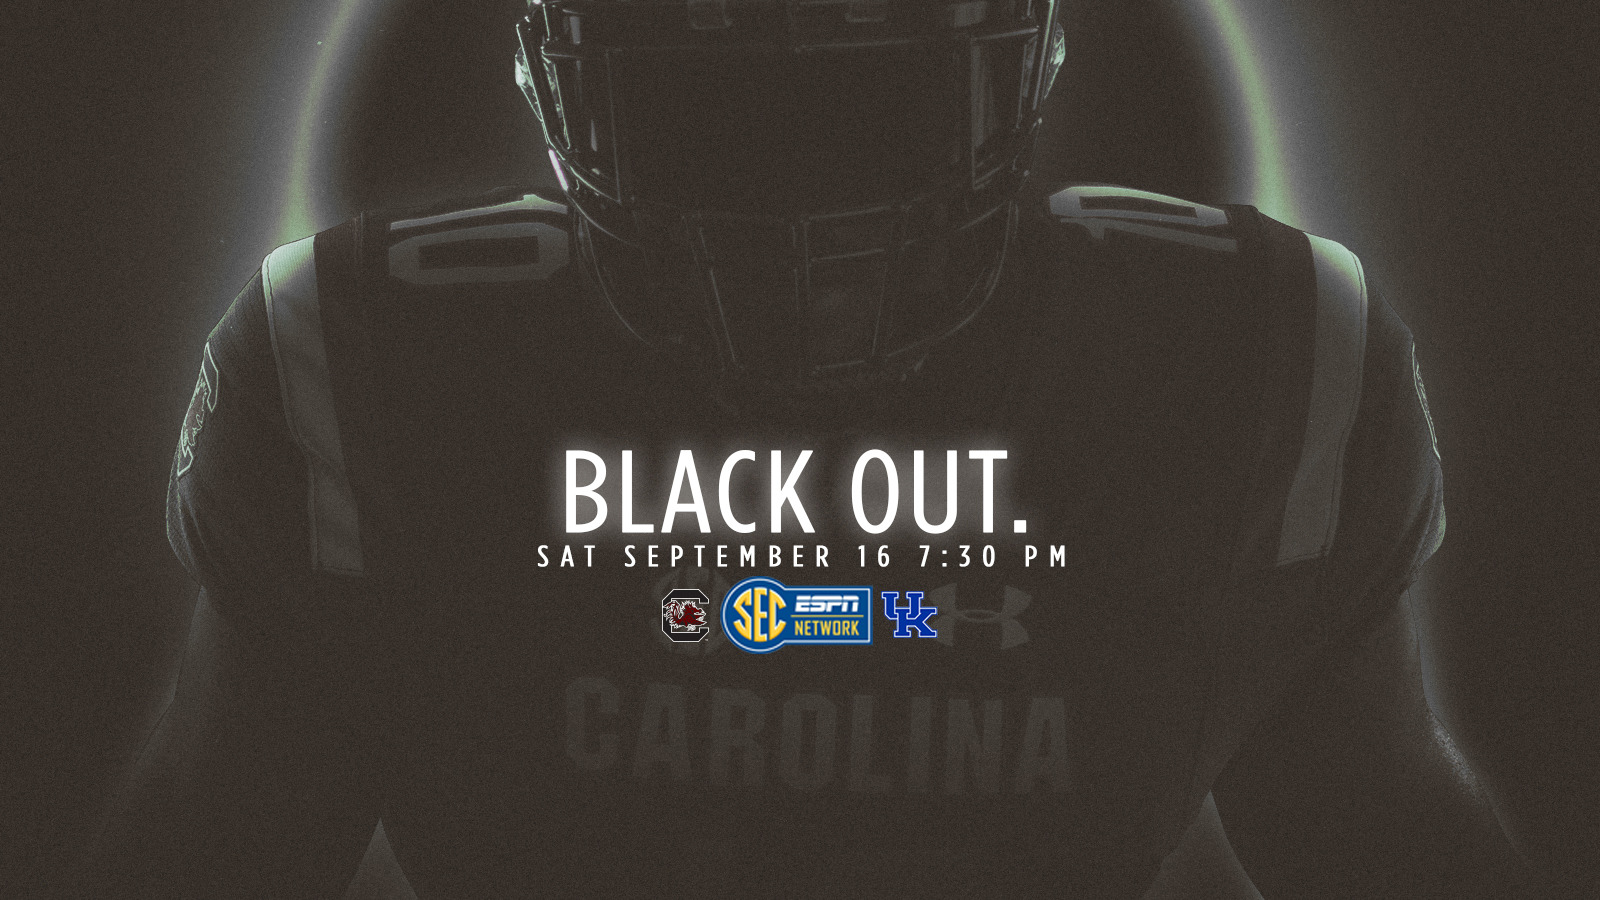 Gamecocks Announce Black Out for Home Opener